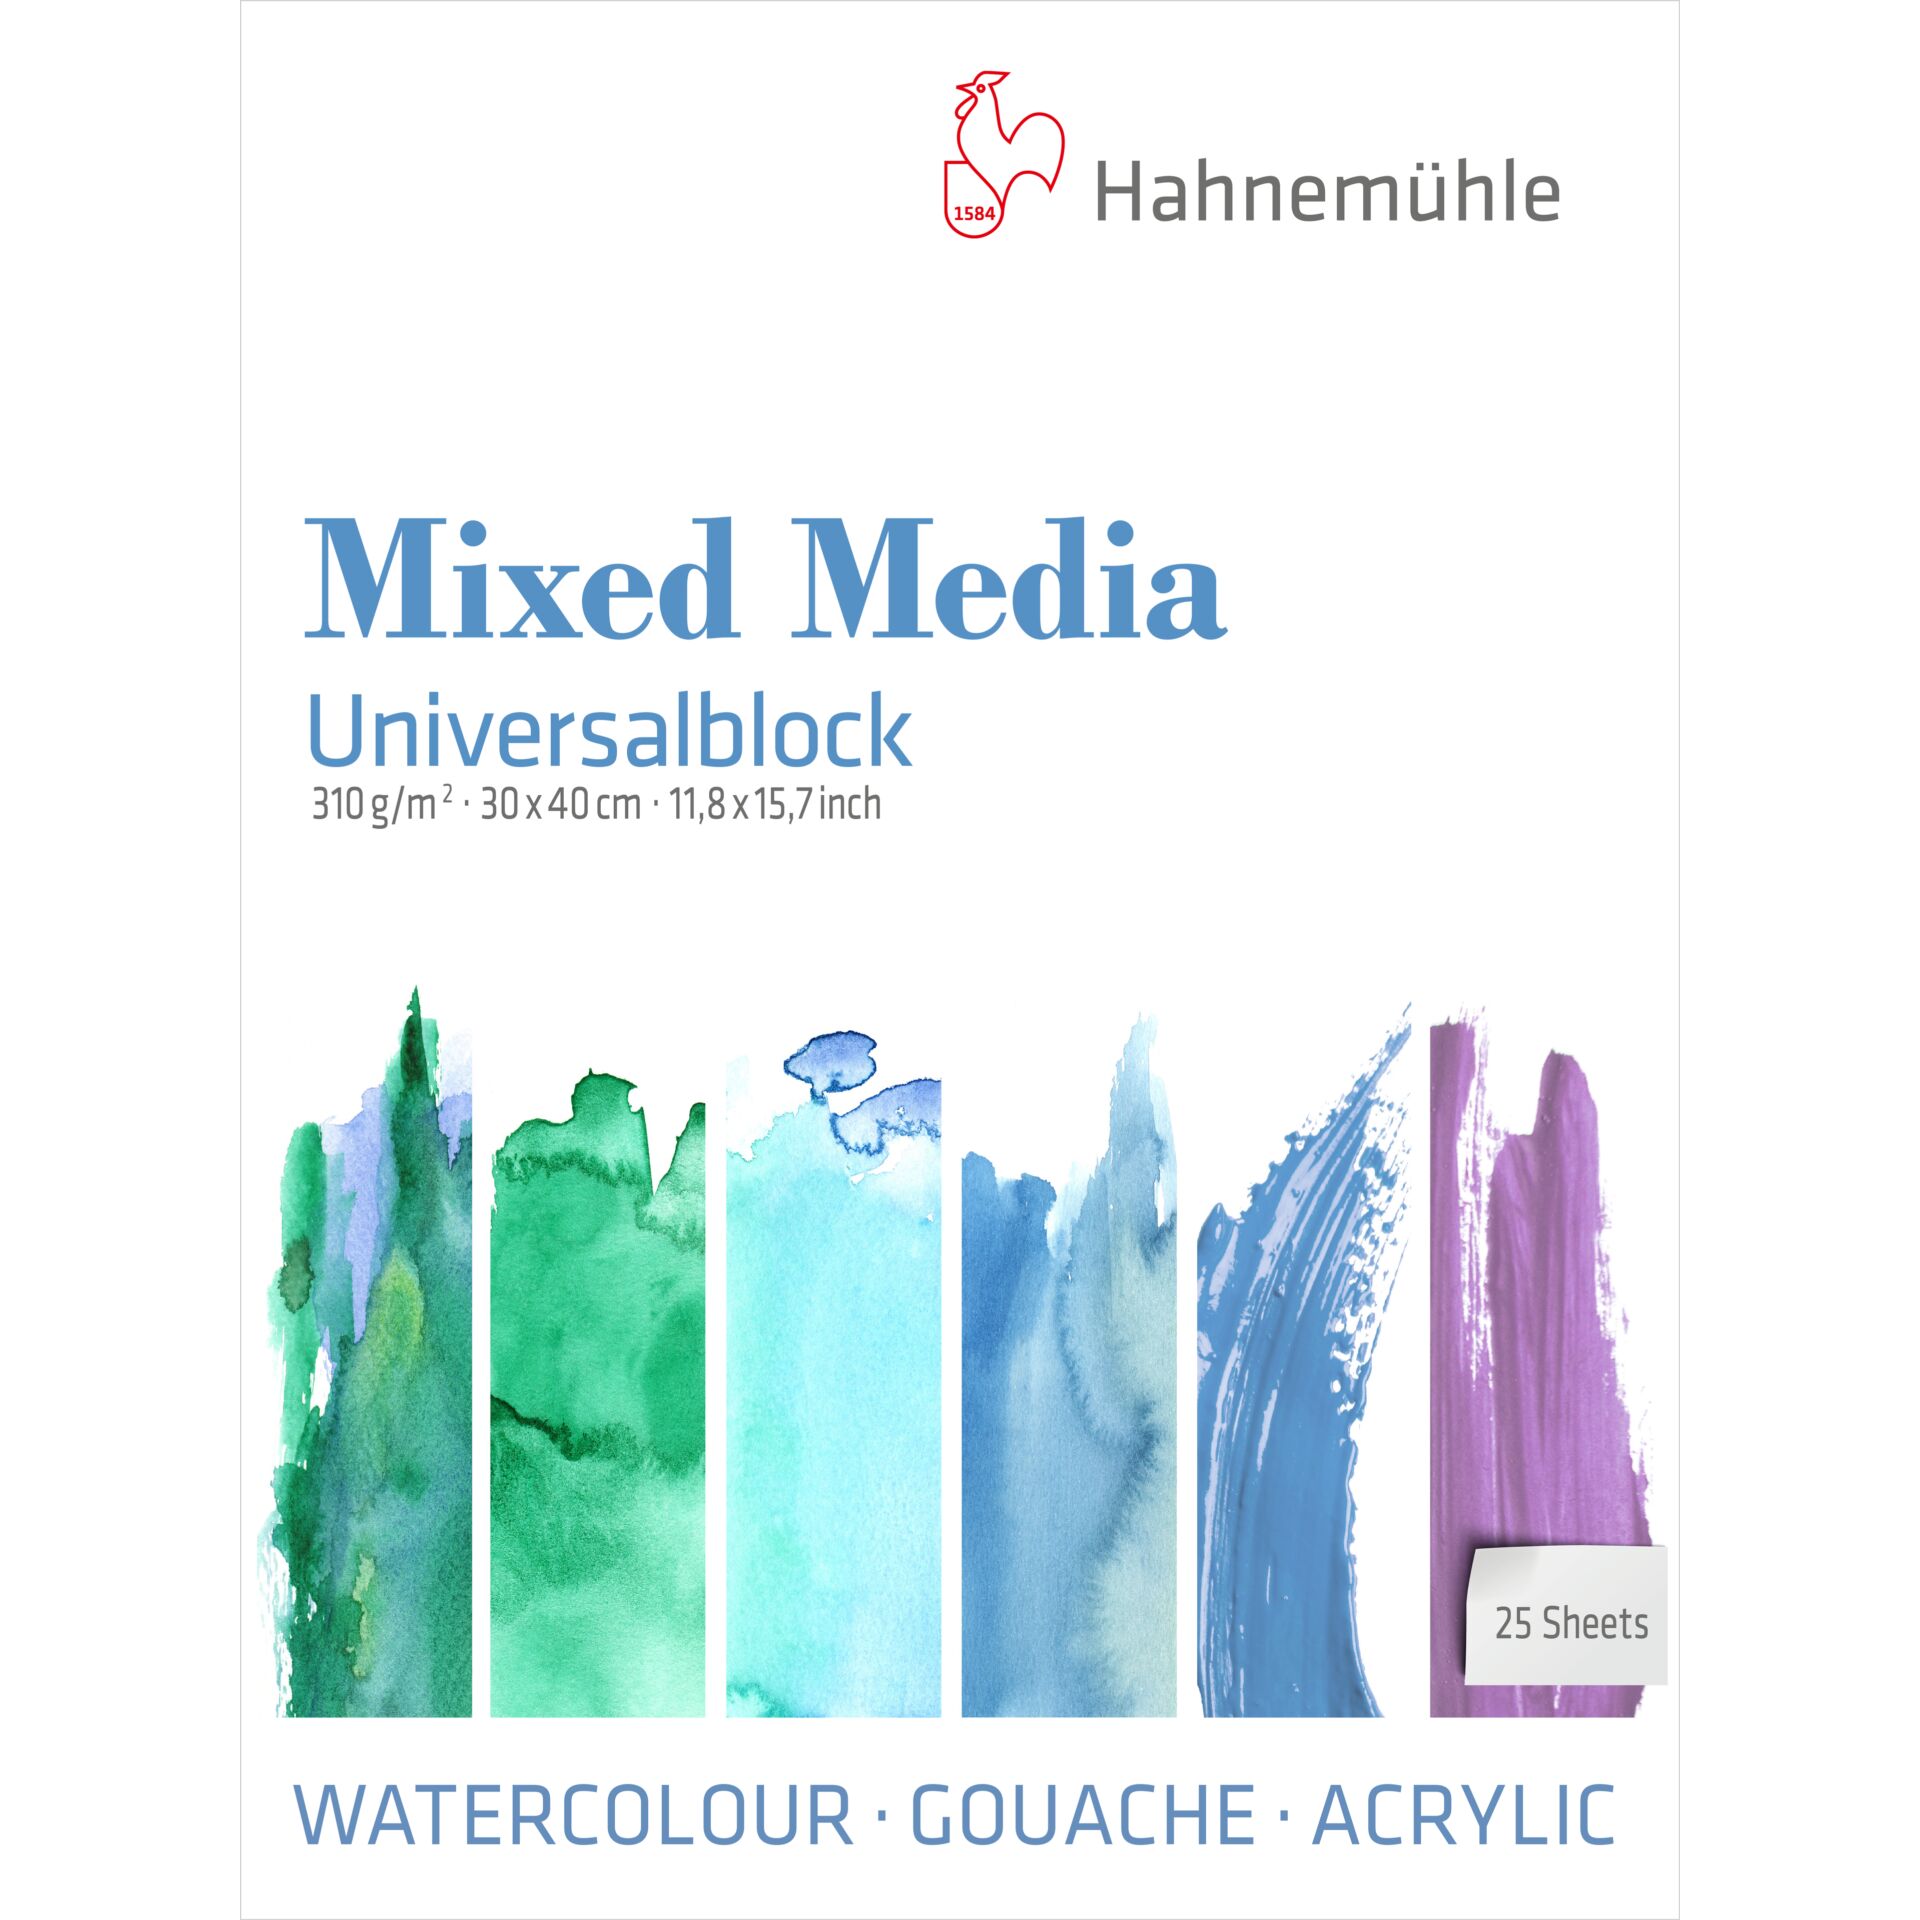 Hahnemühle Mixed Media Universal Pad 25 sheets  30x40 cm  31